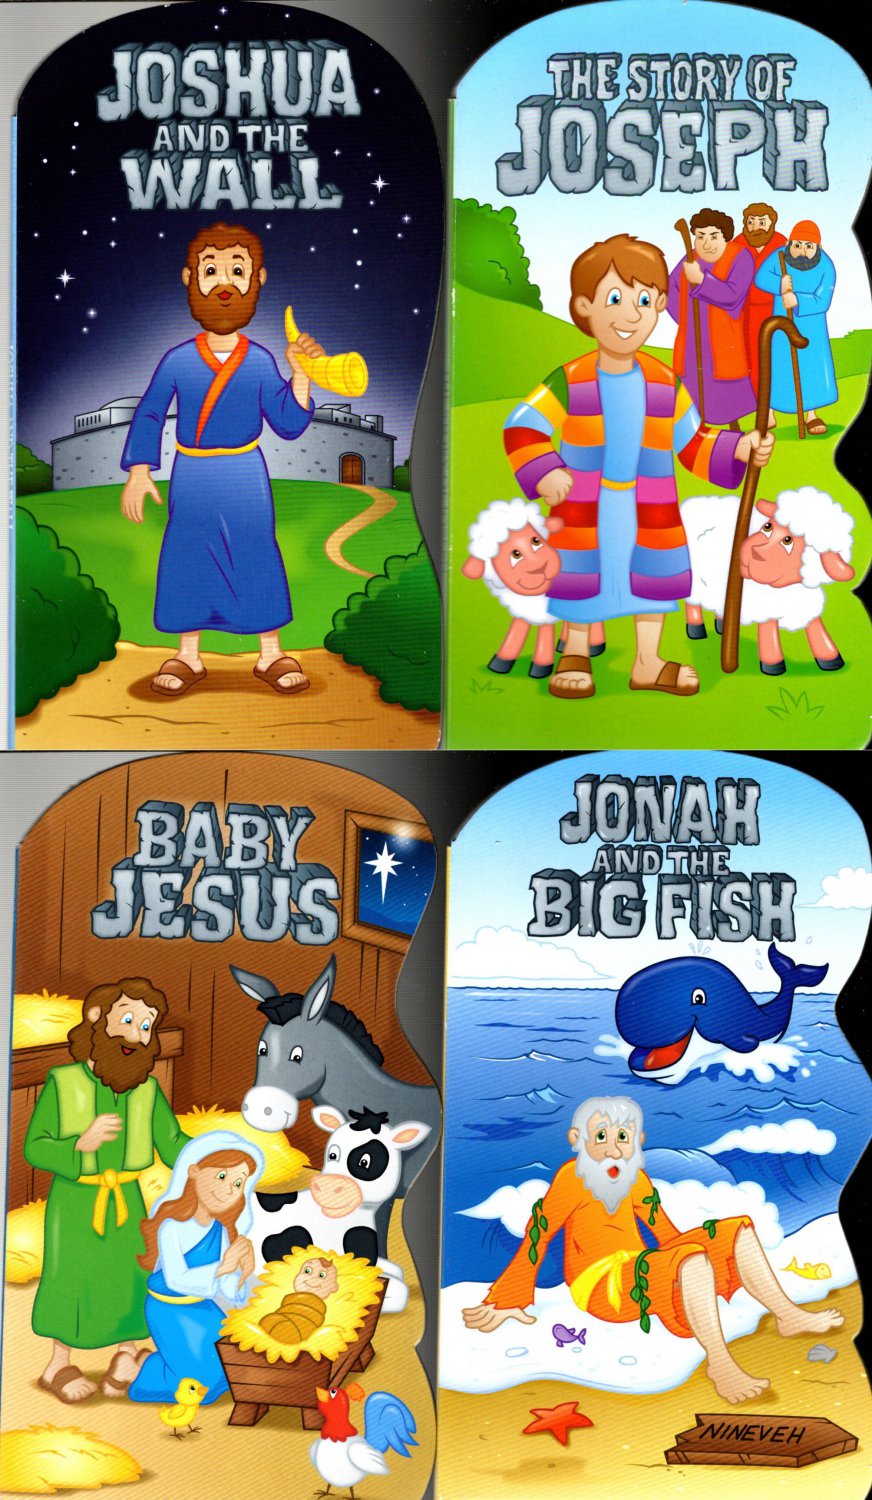 Baby Jesus, Joshua and the Wall, The Story of Joseph, Jonah and the Big Fish - Children's Board Book